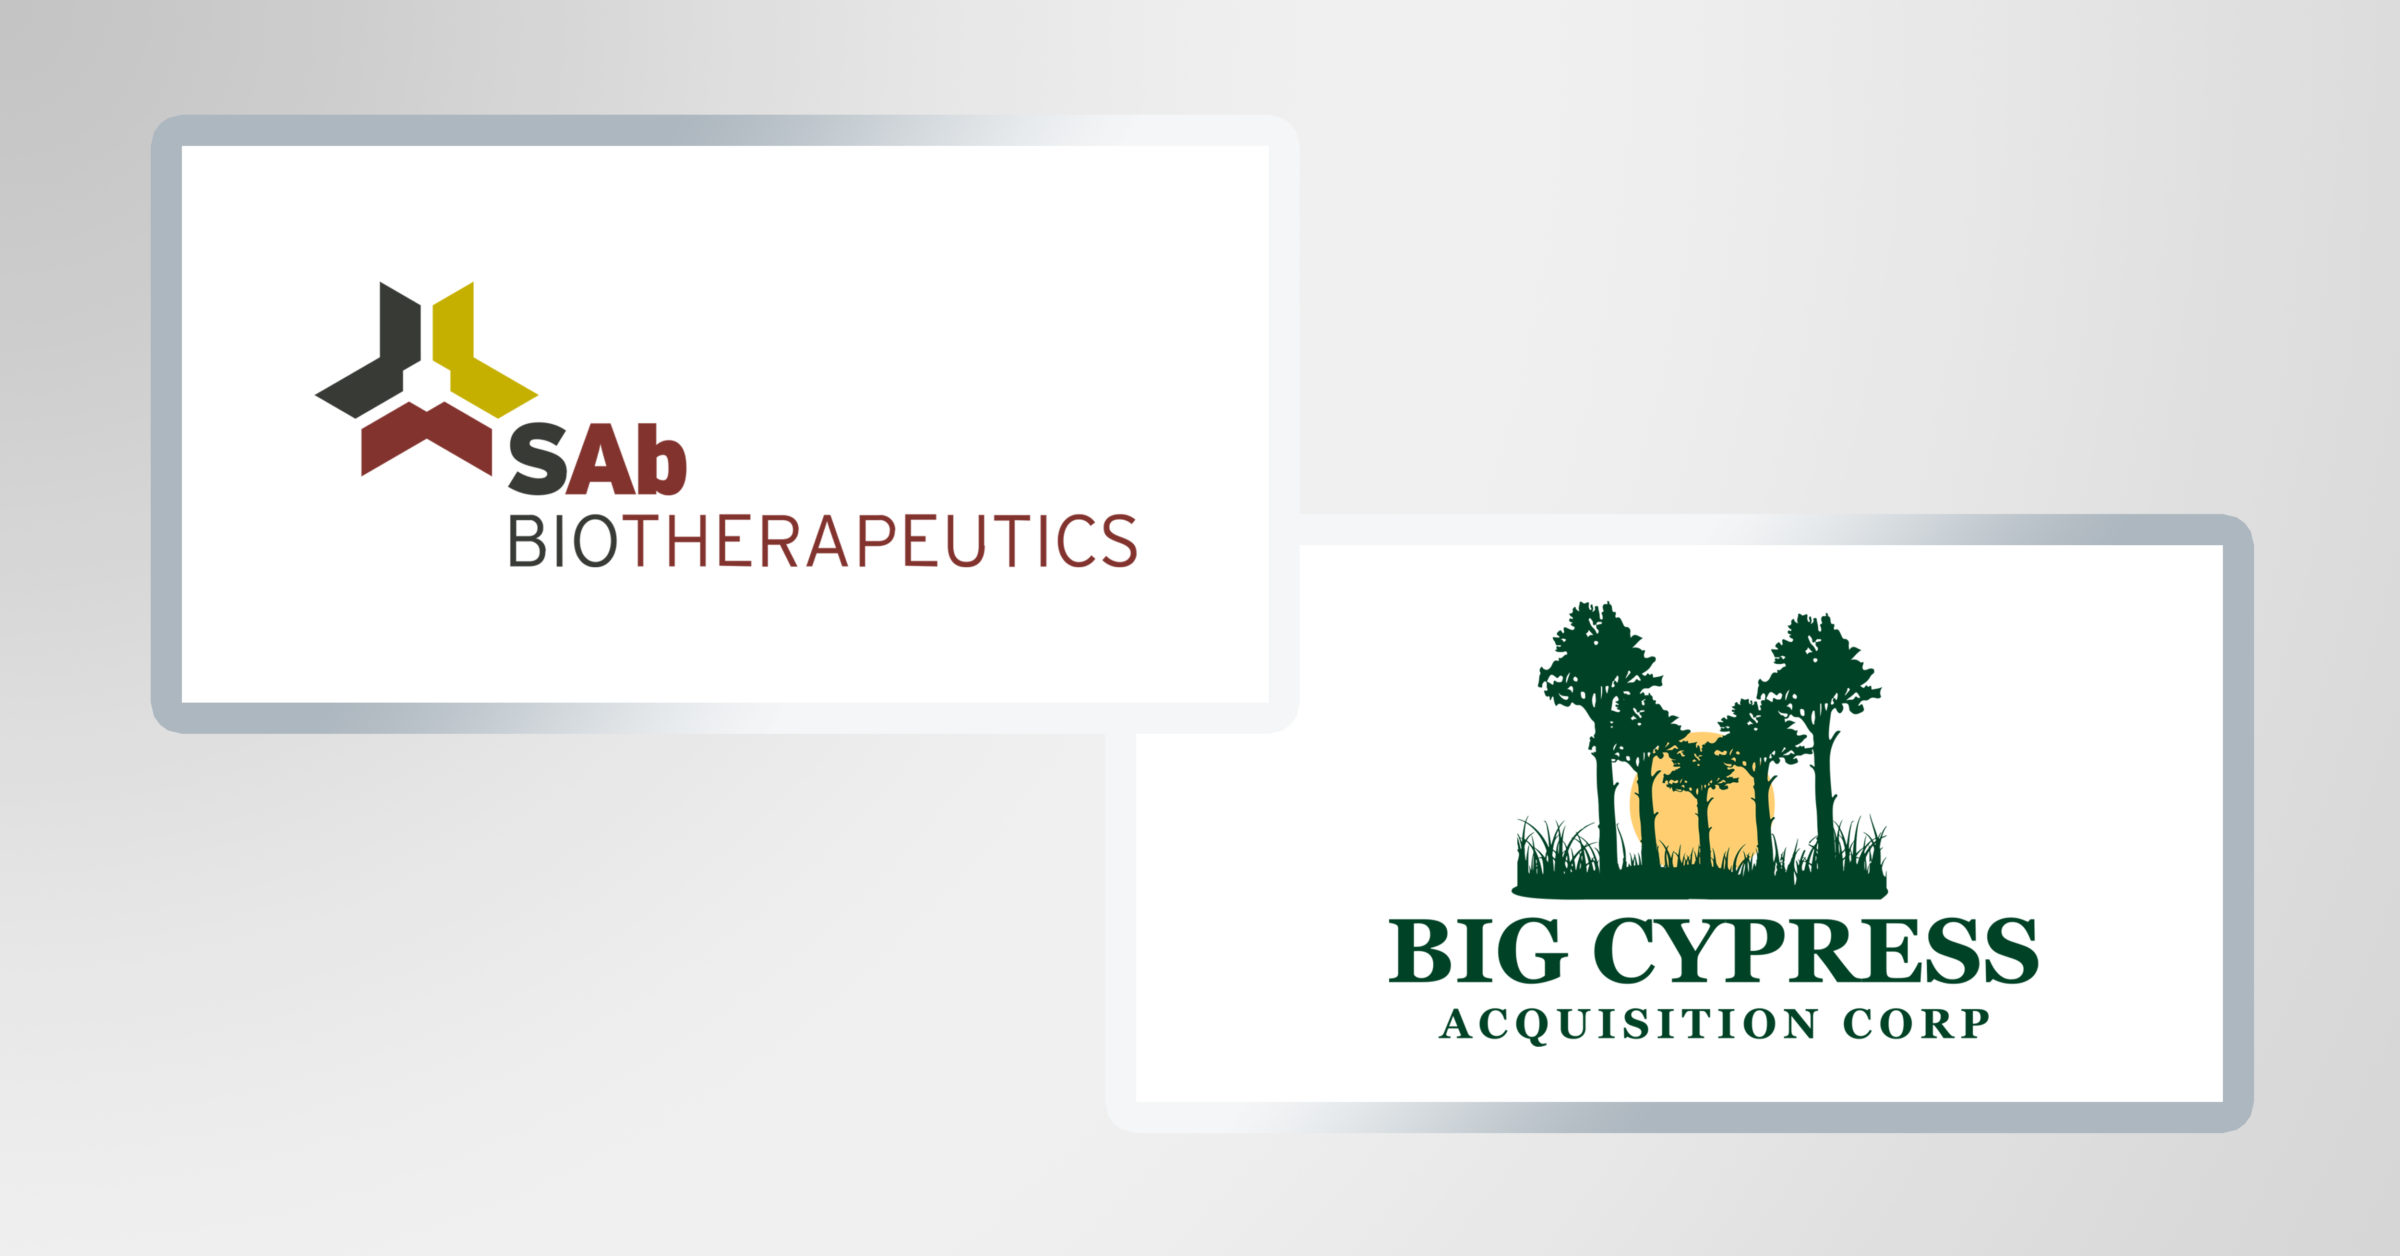 http://SAB%20Biotherapeutics%20to%20List%20on%20Nasdaq%20through%20Merger%20with%20Big%20Cypress%20Acquisition%20Corp.